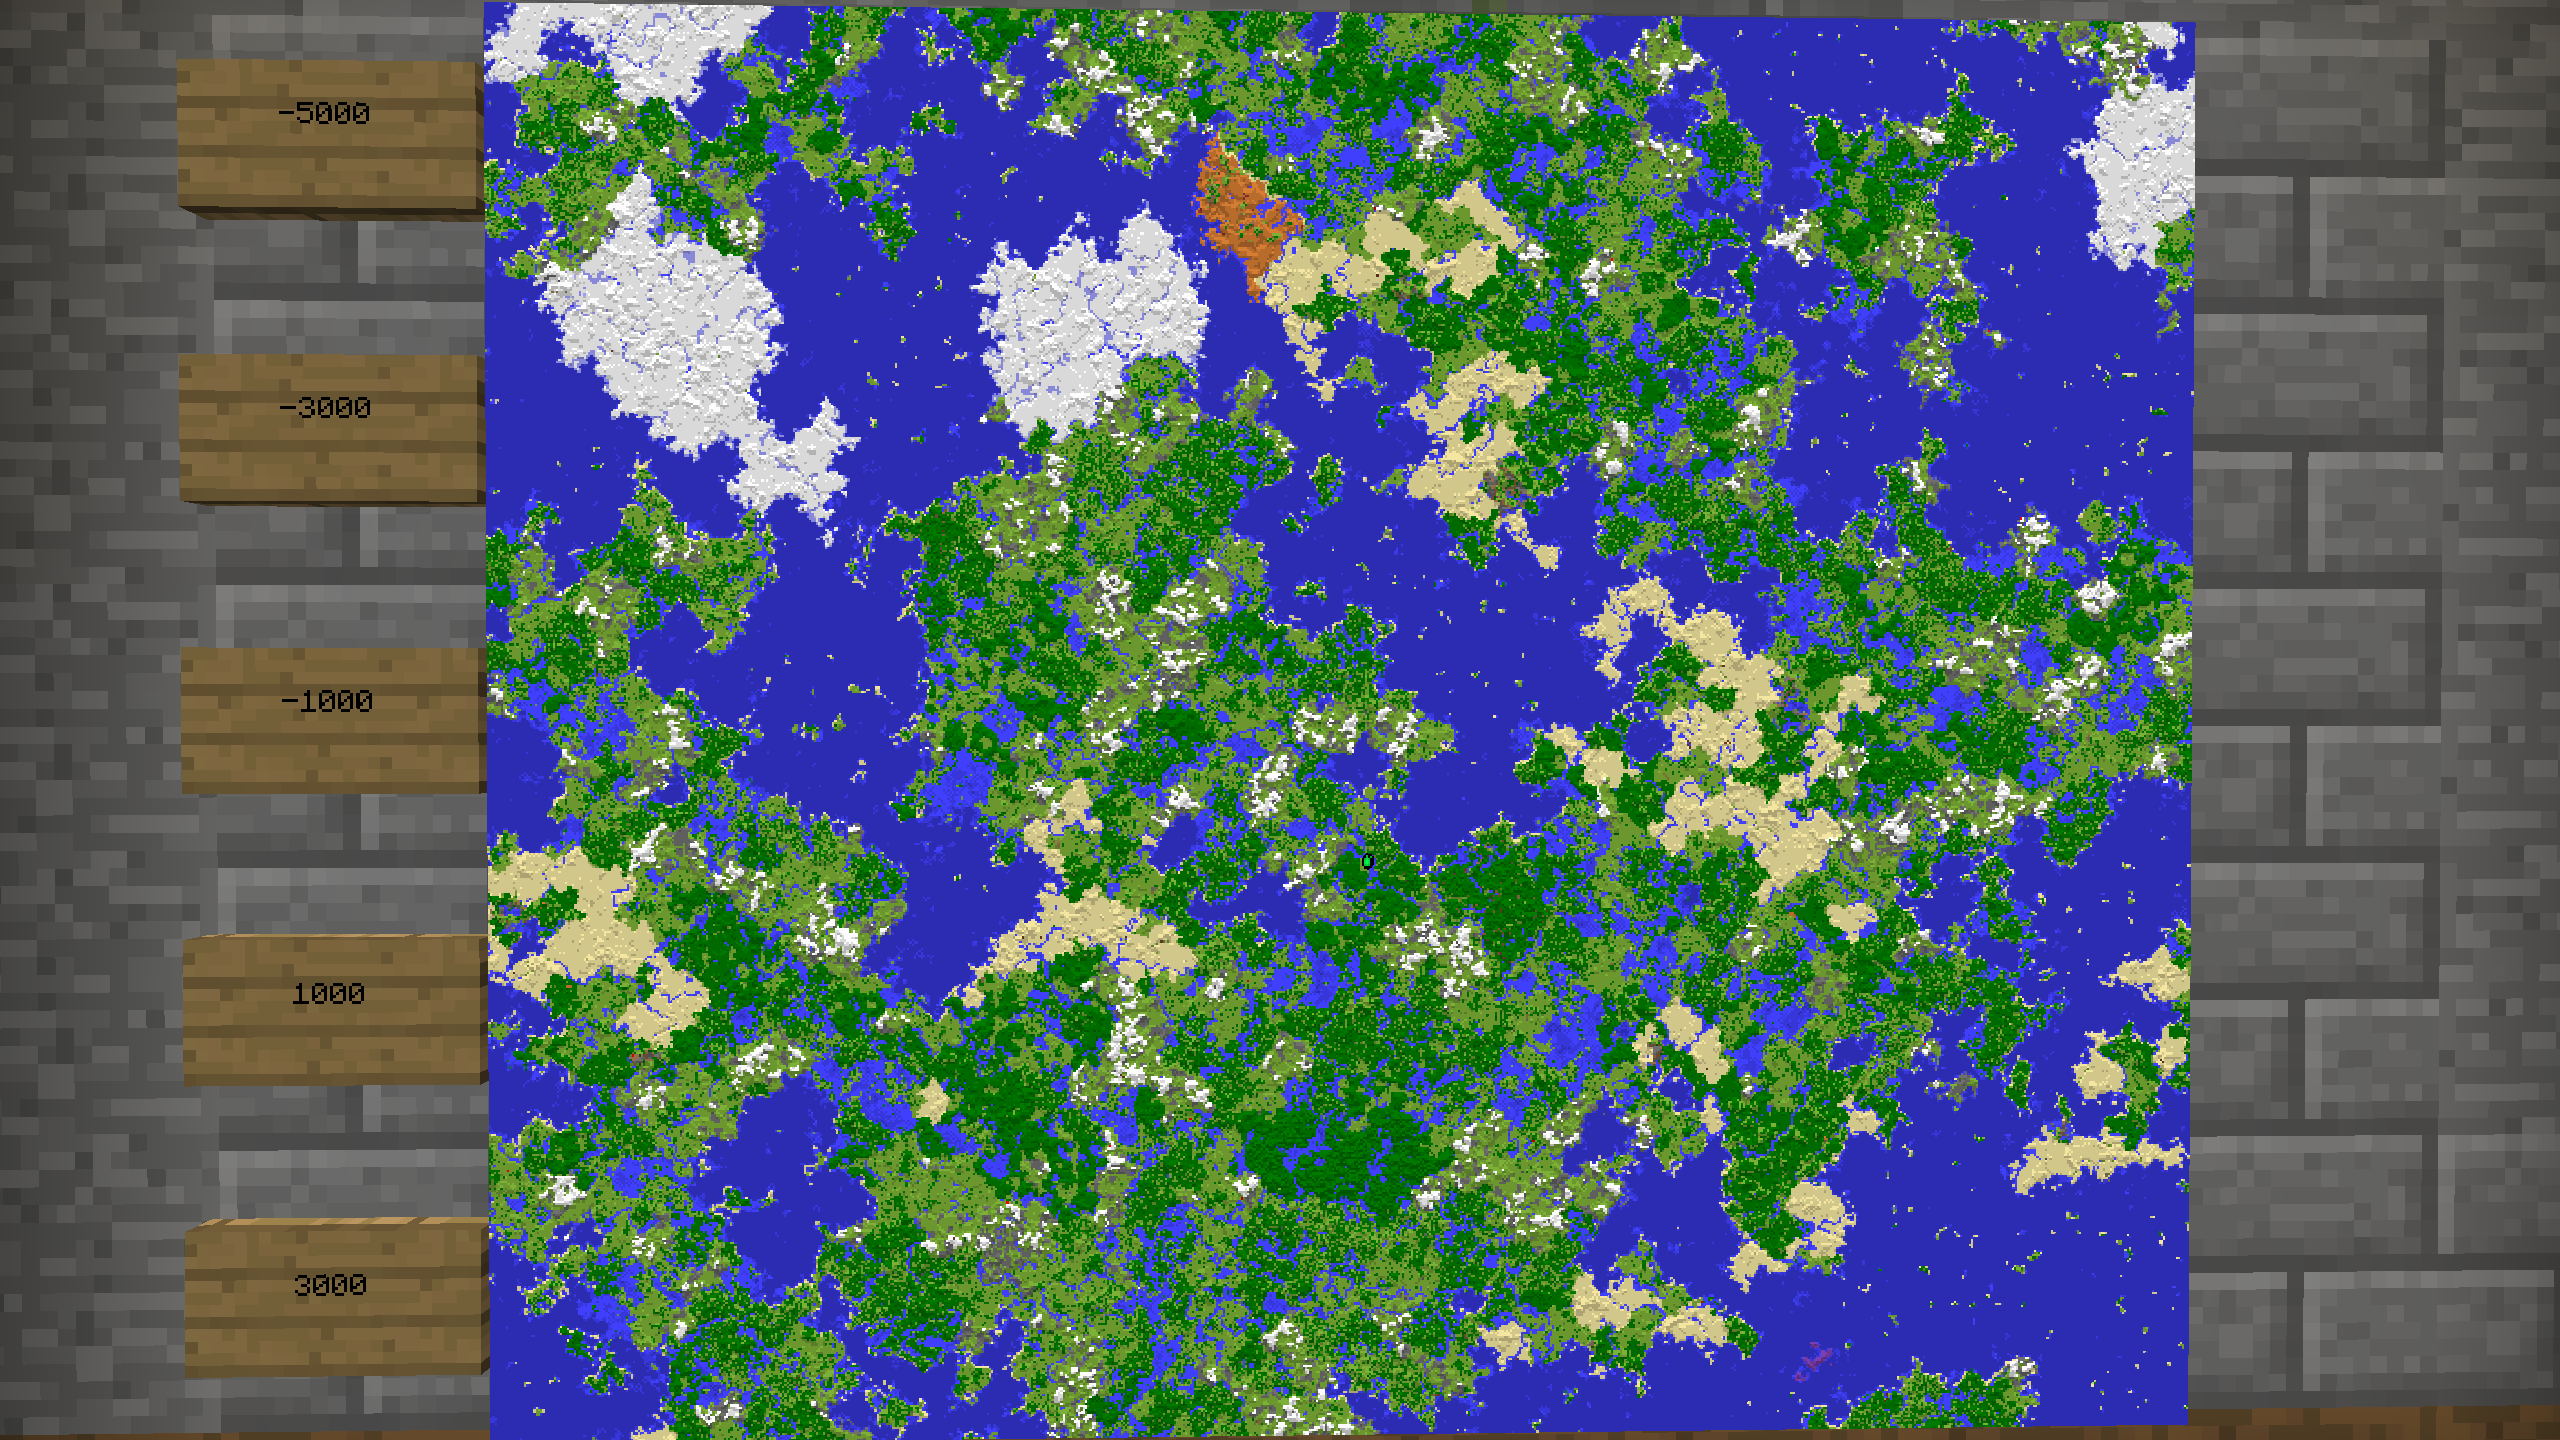 10,240 x 12,288 Map (30 fully zoomed out maps) : Minecraft